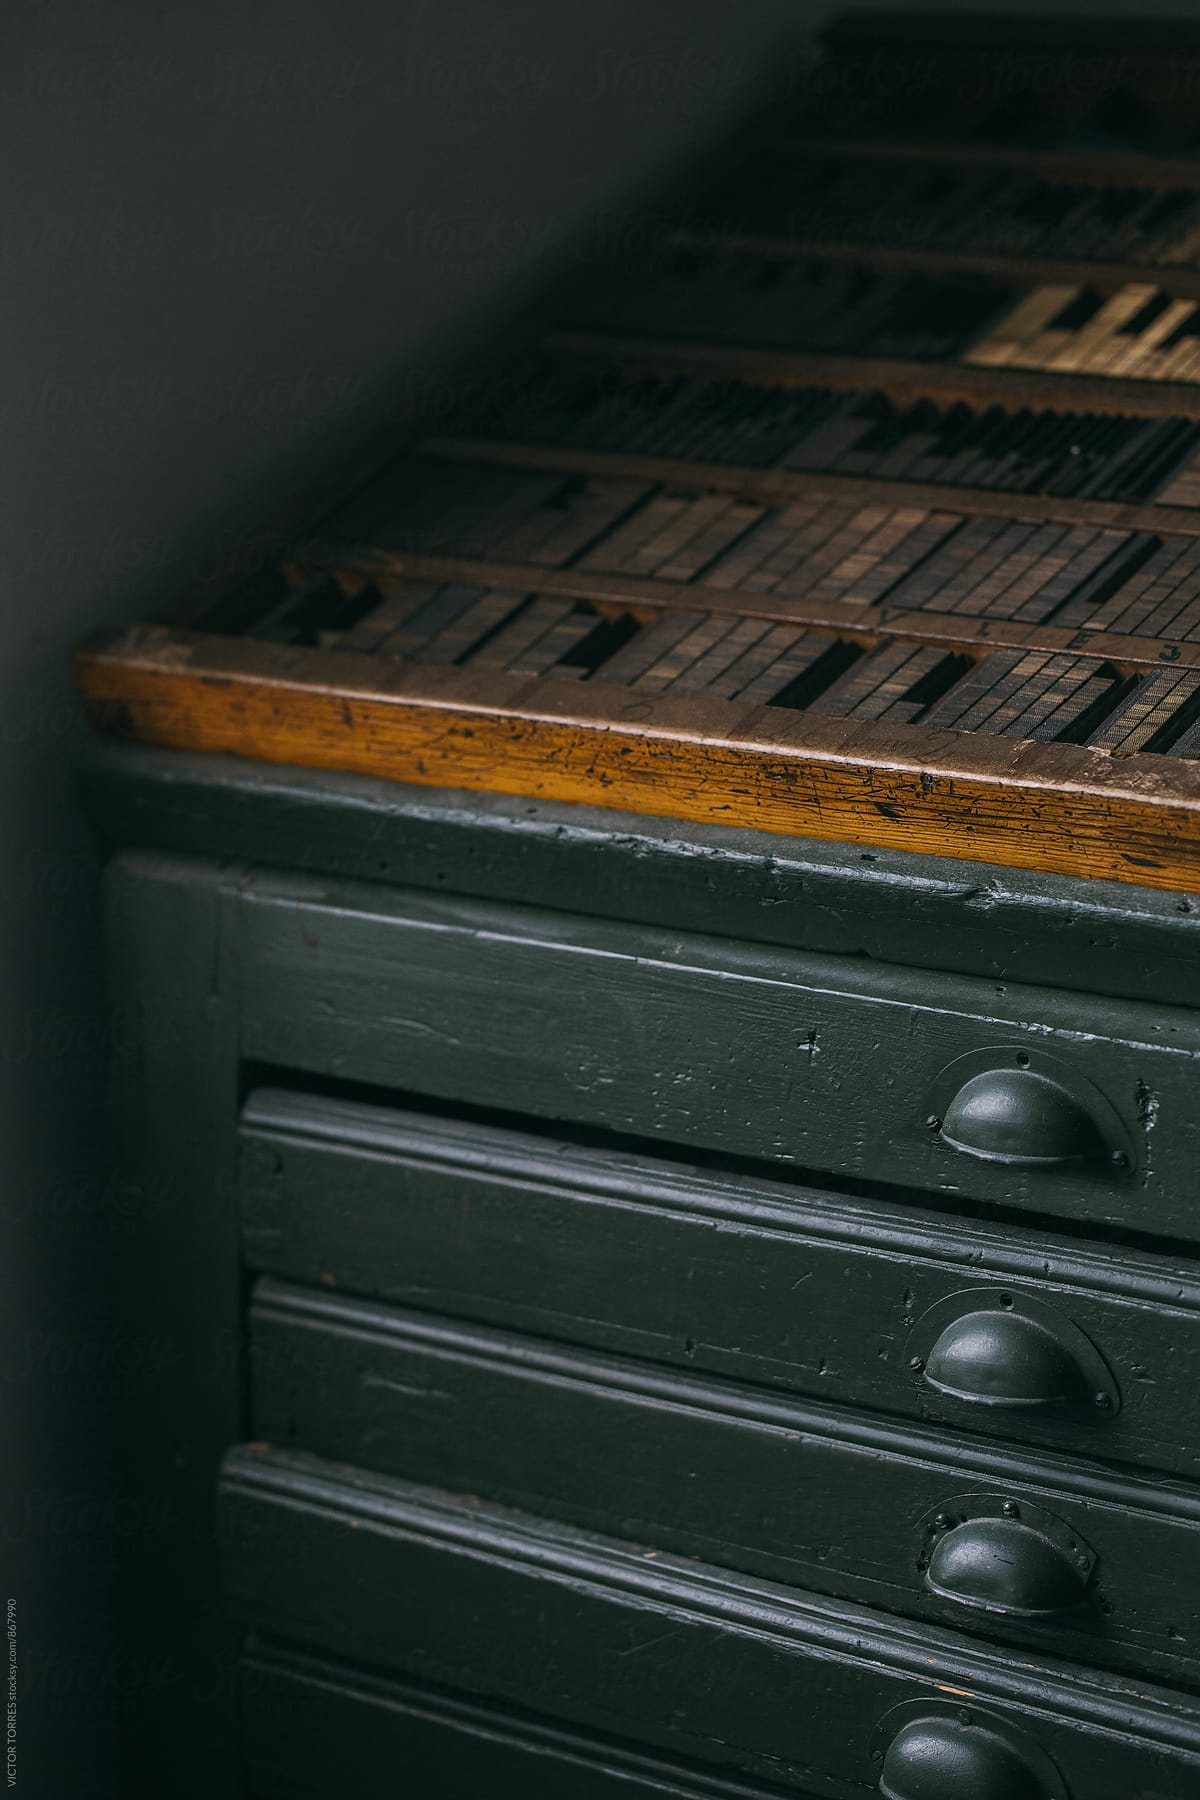 Chest of Drawers with Lead Types in an Old Printing House